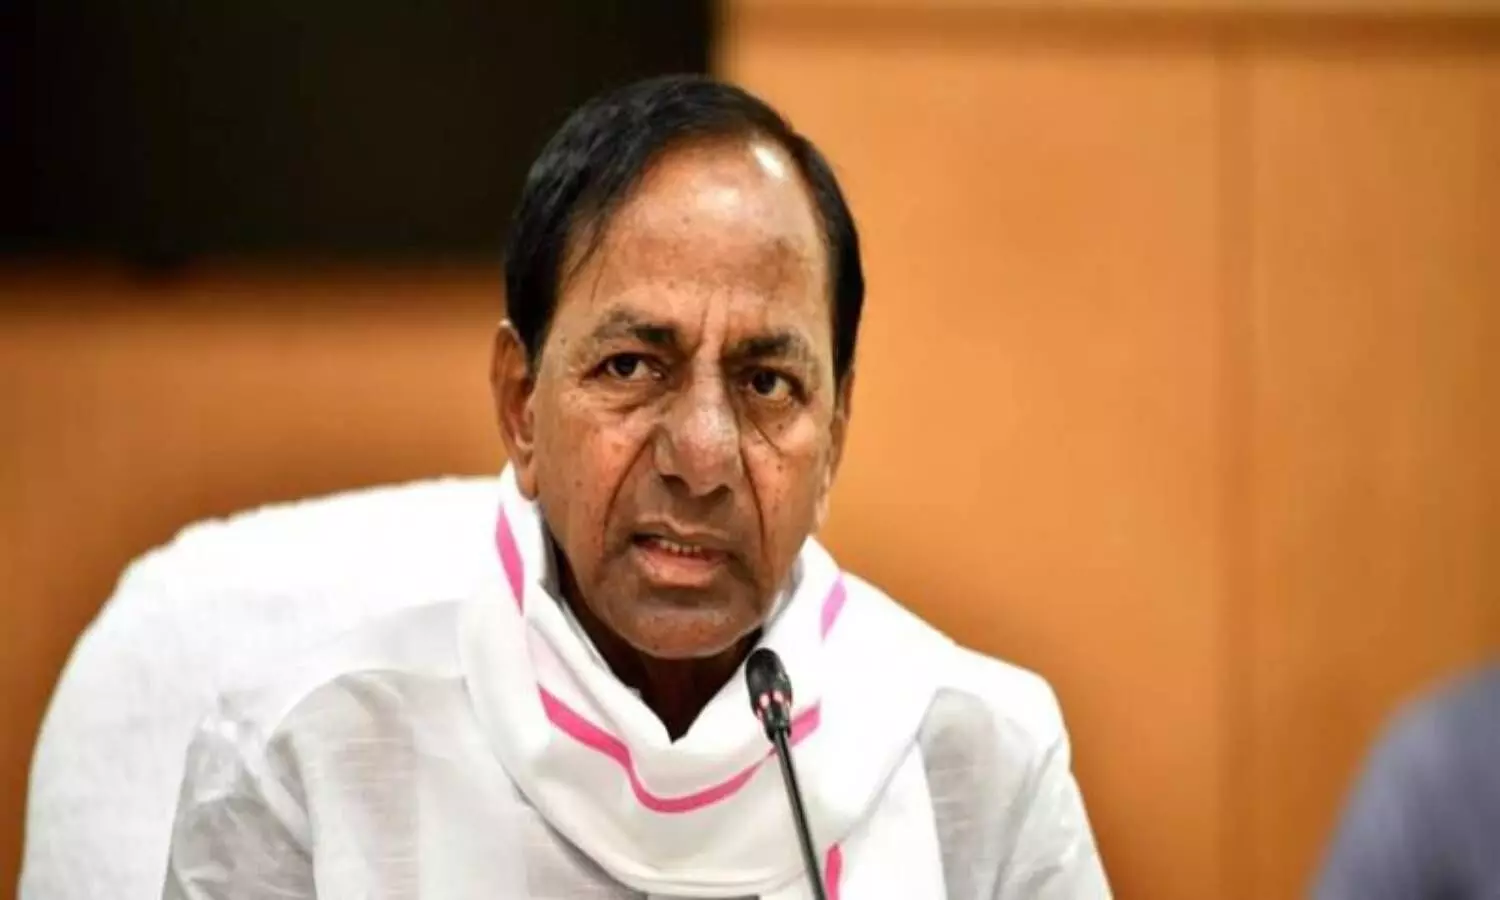 Farmers distressed; ensure fertilizer prices are not hiked: KCR to Modi